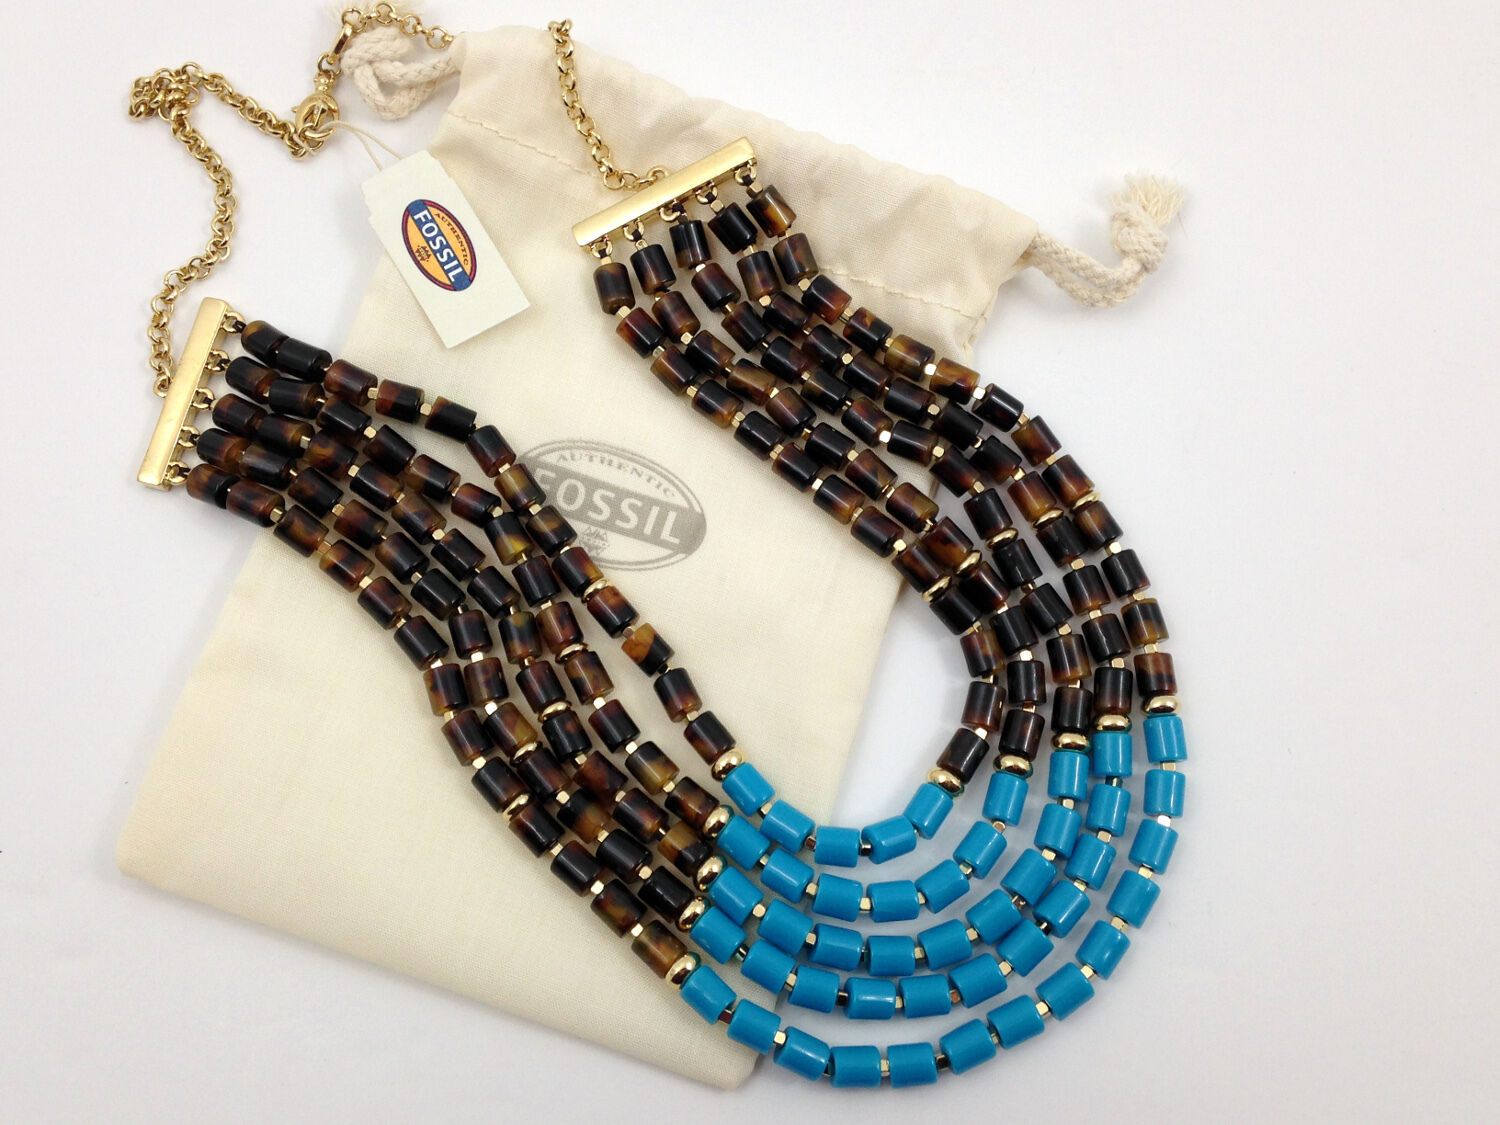  NWT Fossil Gold Tone 5 Strand Necklace Tortoise Turquoise Blue Beads 